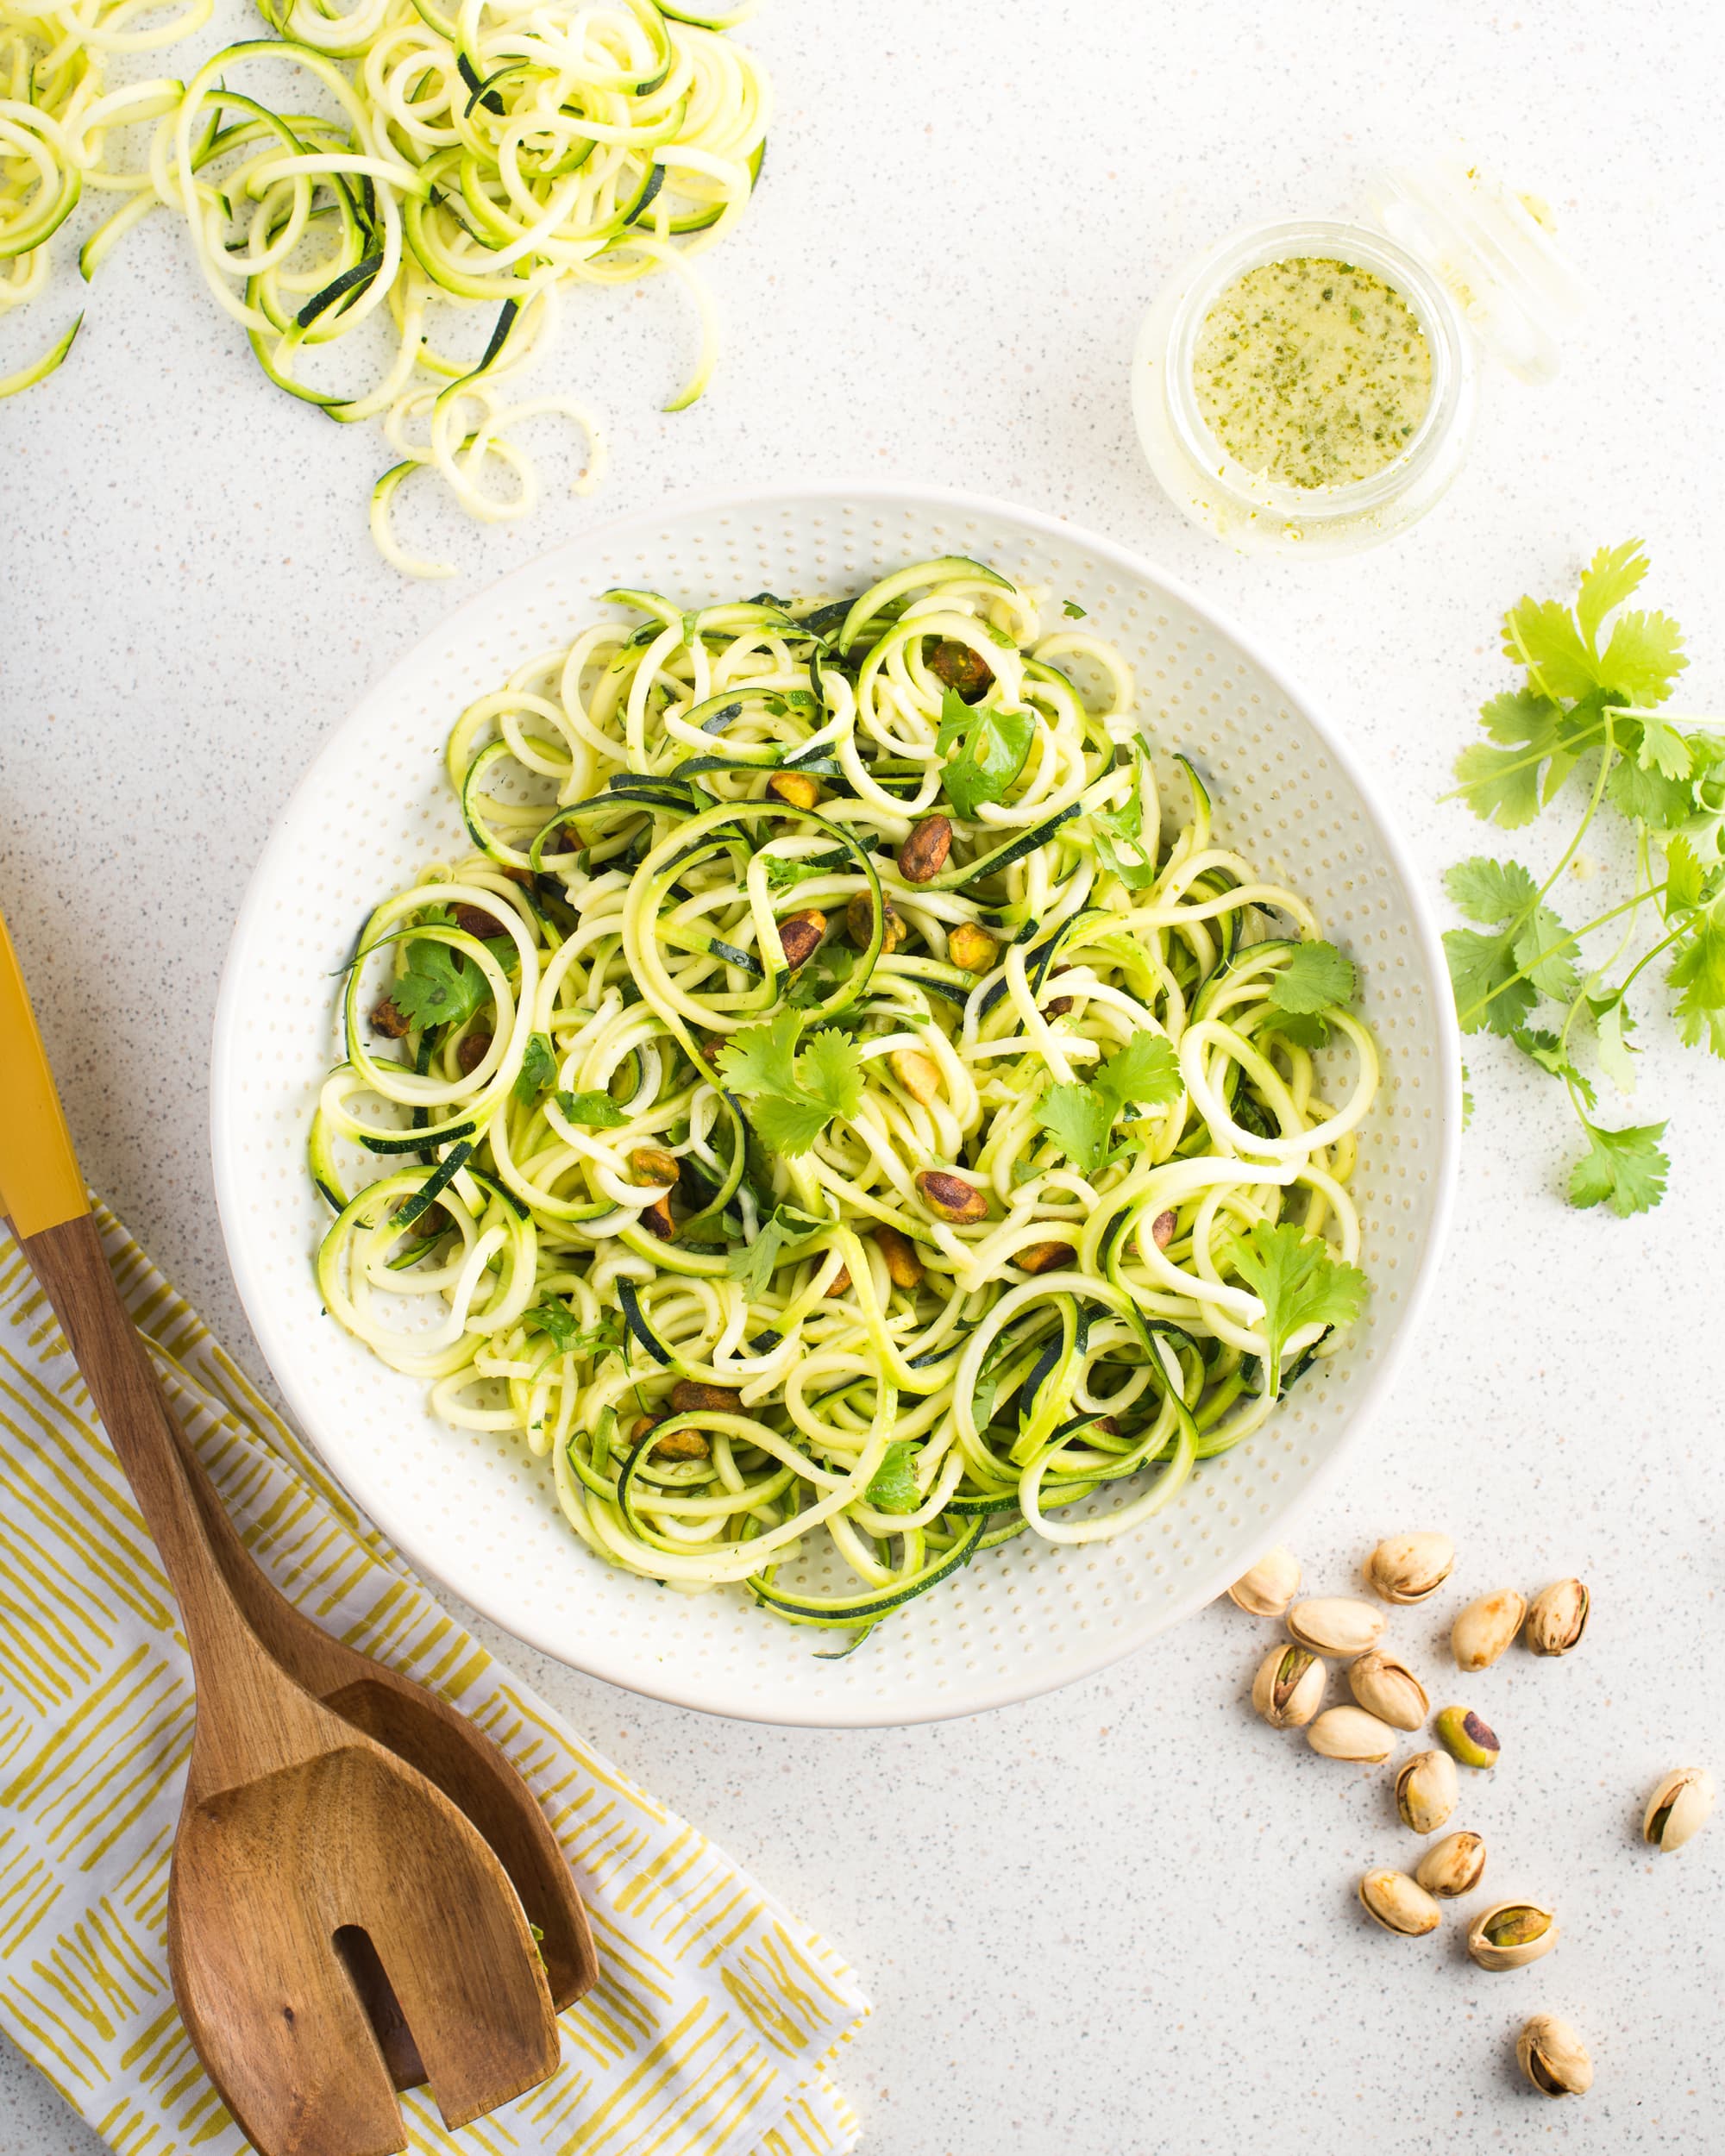 We Tested Four Different Tools for Making Zoodles — The Winner